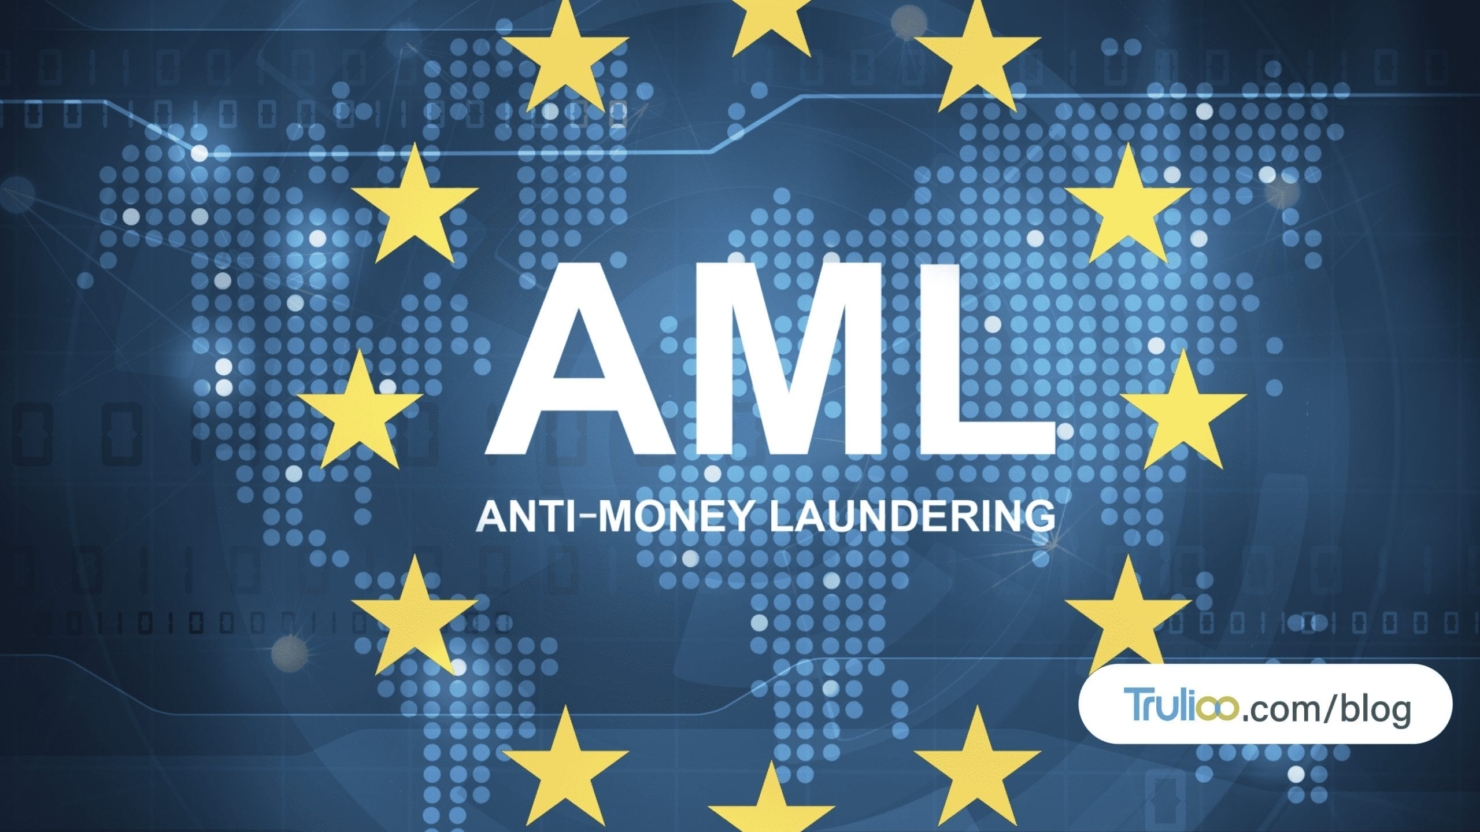 Tech - The fight against AML